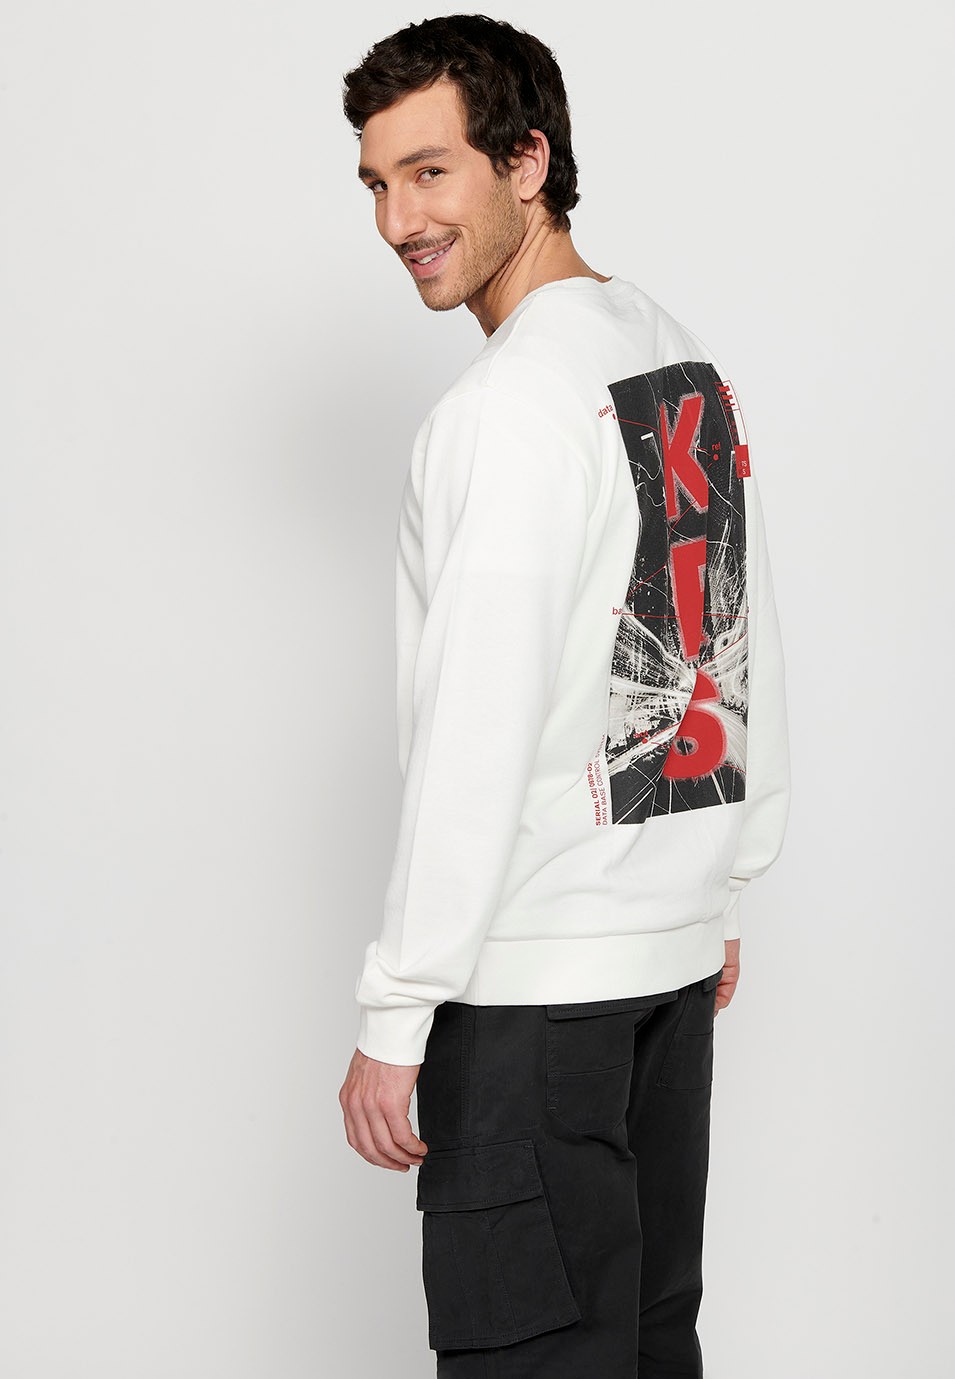 Long-sleeved sweatshirt with round neck and back detail in White for Men 6